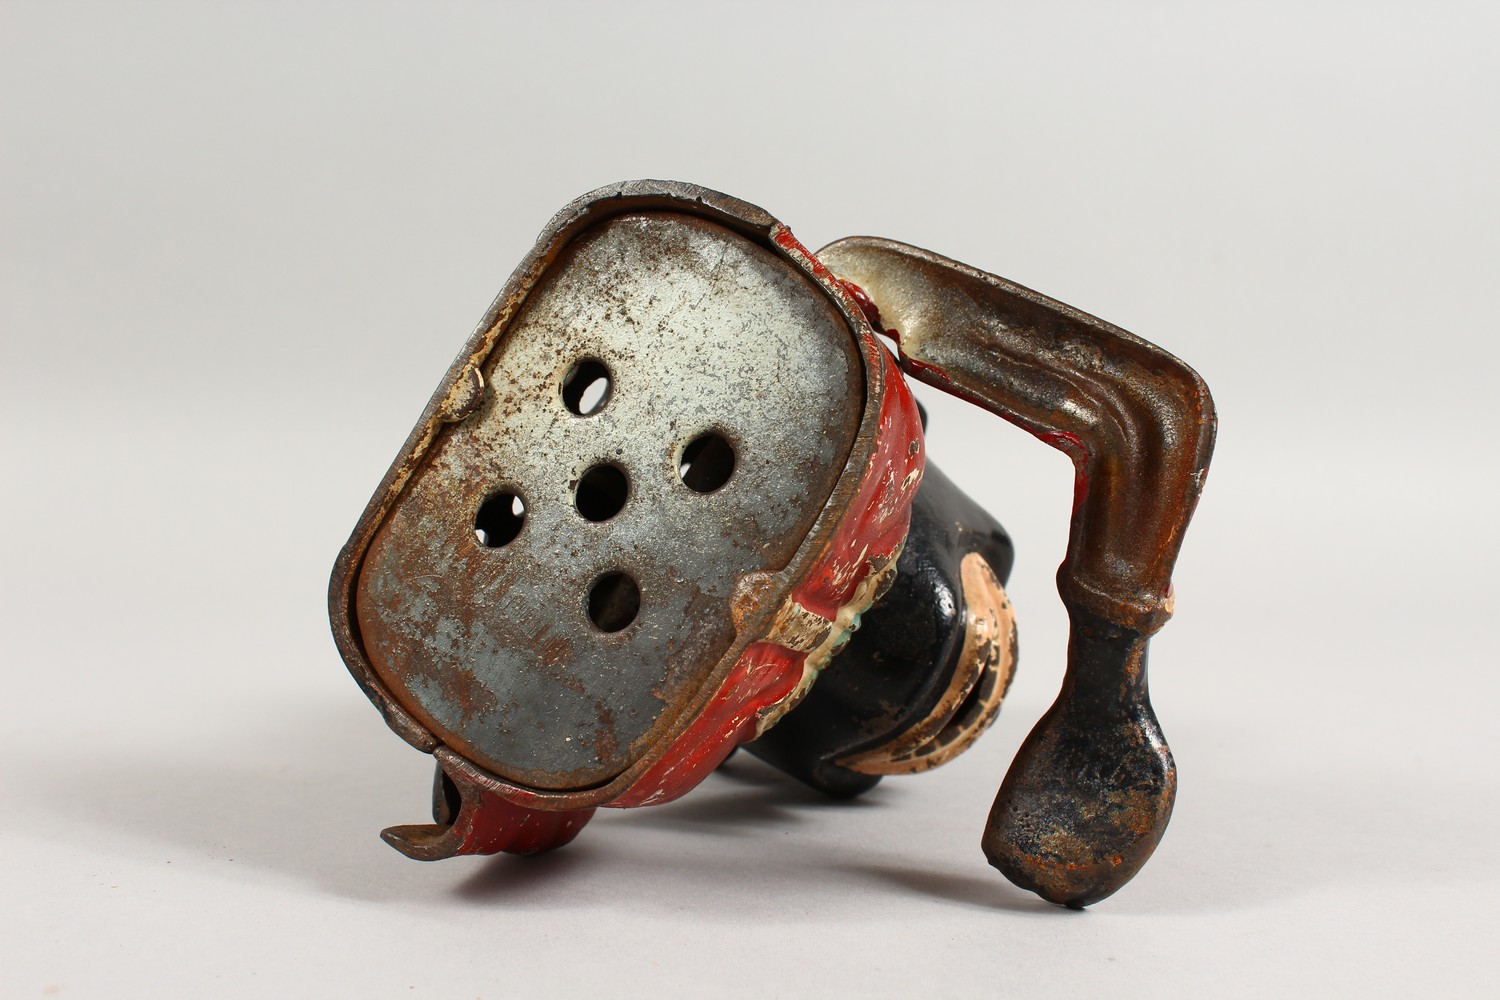 AN EARLY 20TH CENTURY NOVELTY CAST IRON MONEY BANK. - Image 5 of 5